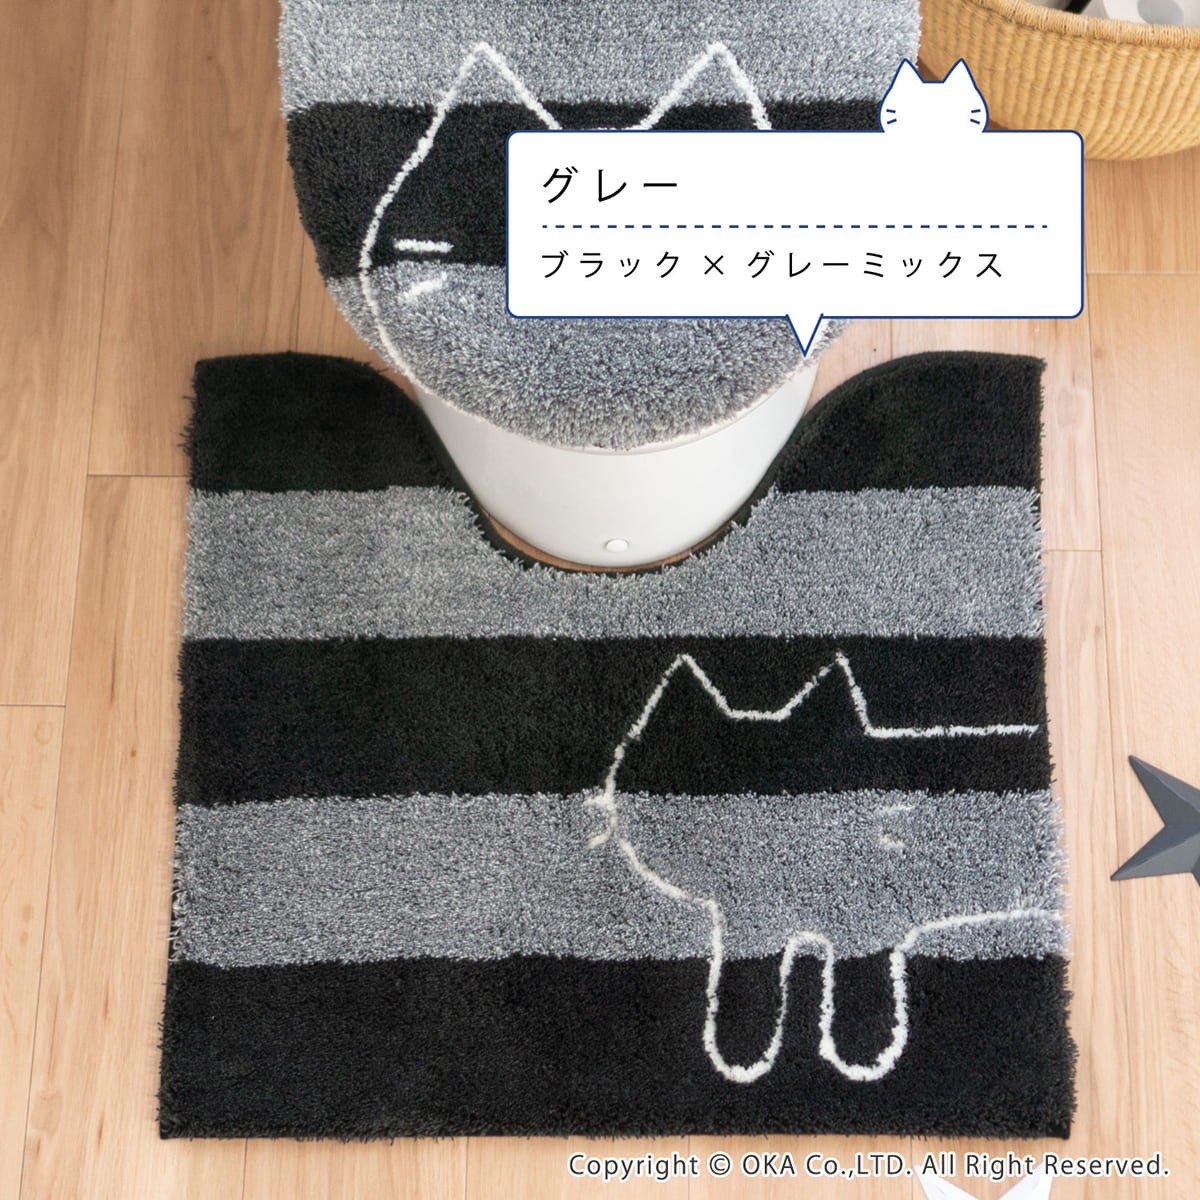  toilet mat set 2 point approximately 60×60cm.... toilet mat +dorenimo cover cover ( washing heating type normal type combined use ) toilet mat set cat ..oka